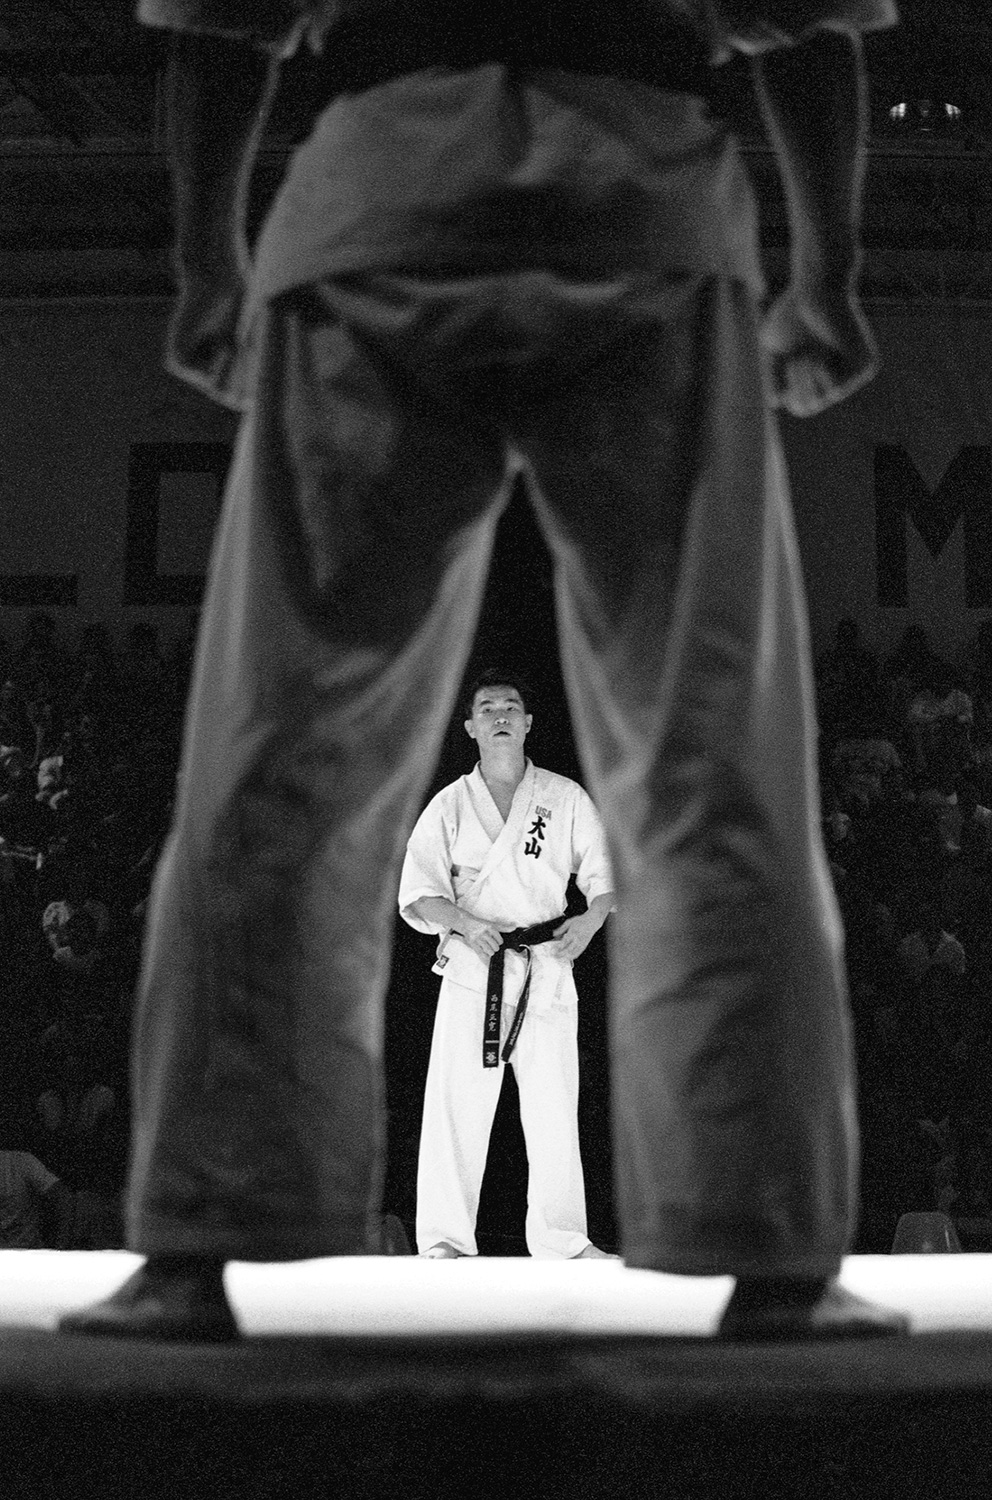  These pictures are from a tournament between various Tri-state Kyokushin Karate schools; I knew folks from the  New York Oyama school . Kyokushin is known as a traditional, hard-ass, bareknuckle style; some folks still apprentice in the old way by l